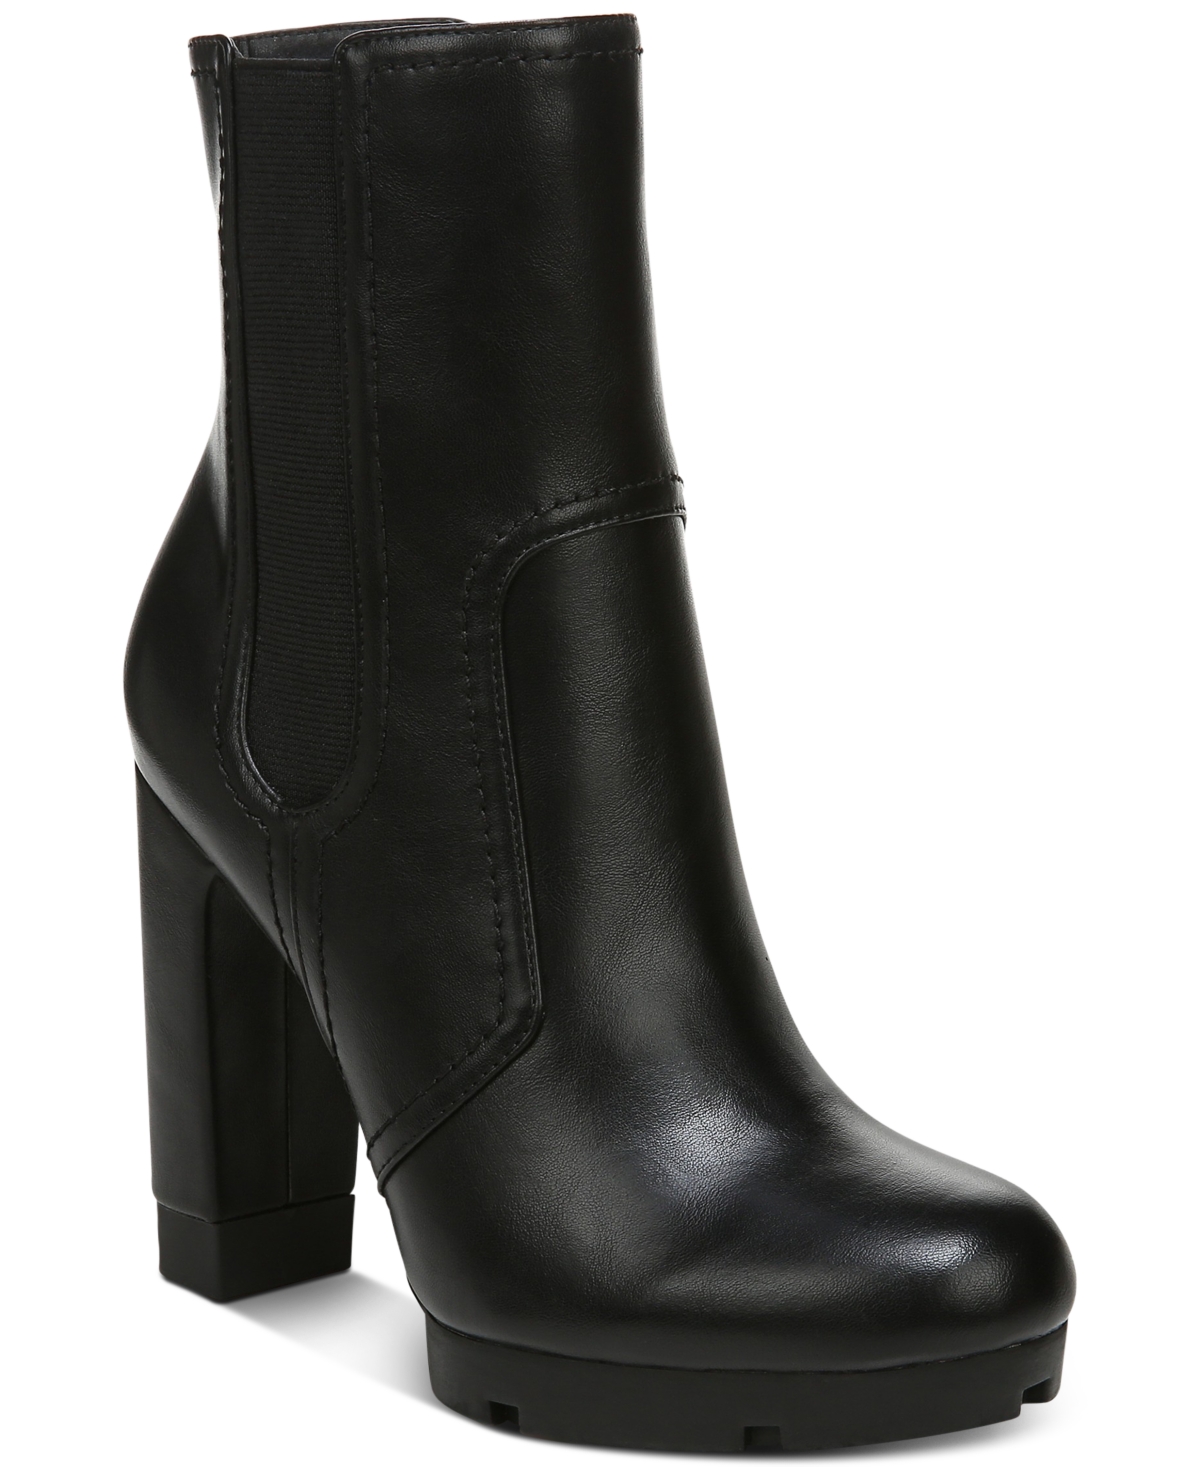 Women's Graciie Platform Booties, Created for Macy's - Black Smooth